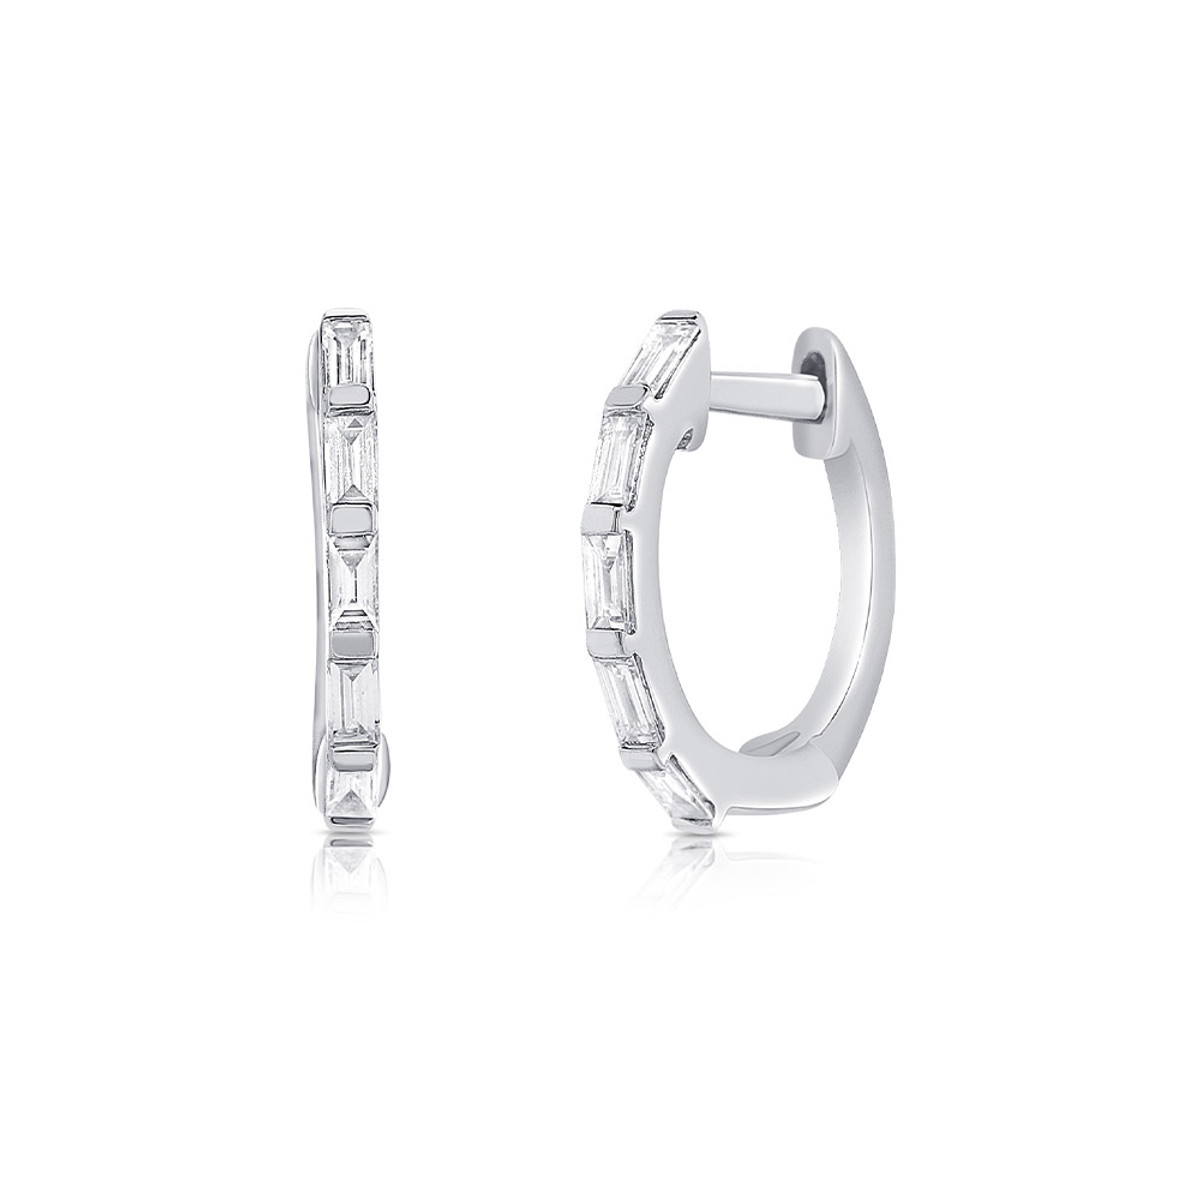 Hyde Park Collection 14K White Gold Diamond Huggie Hoop Earrings-41767 Product Image